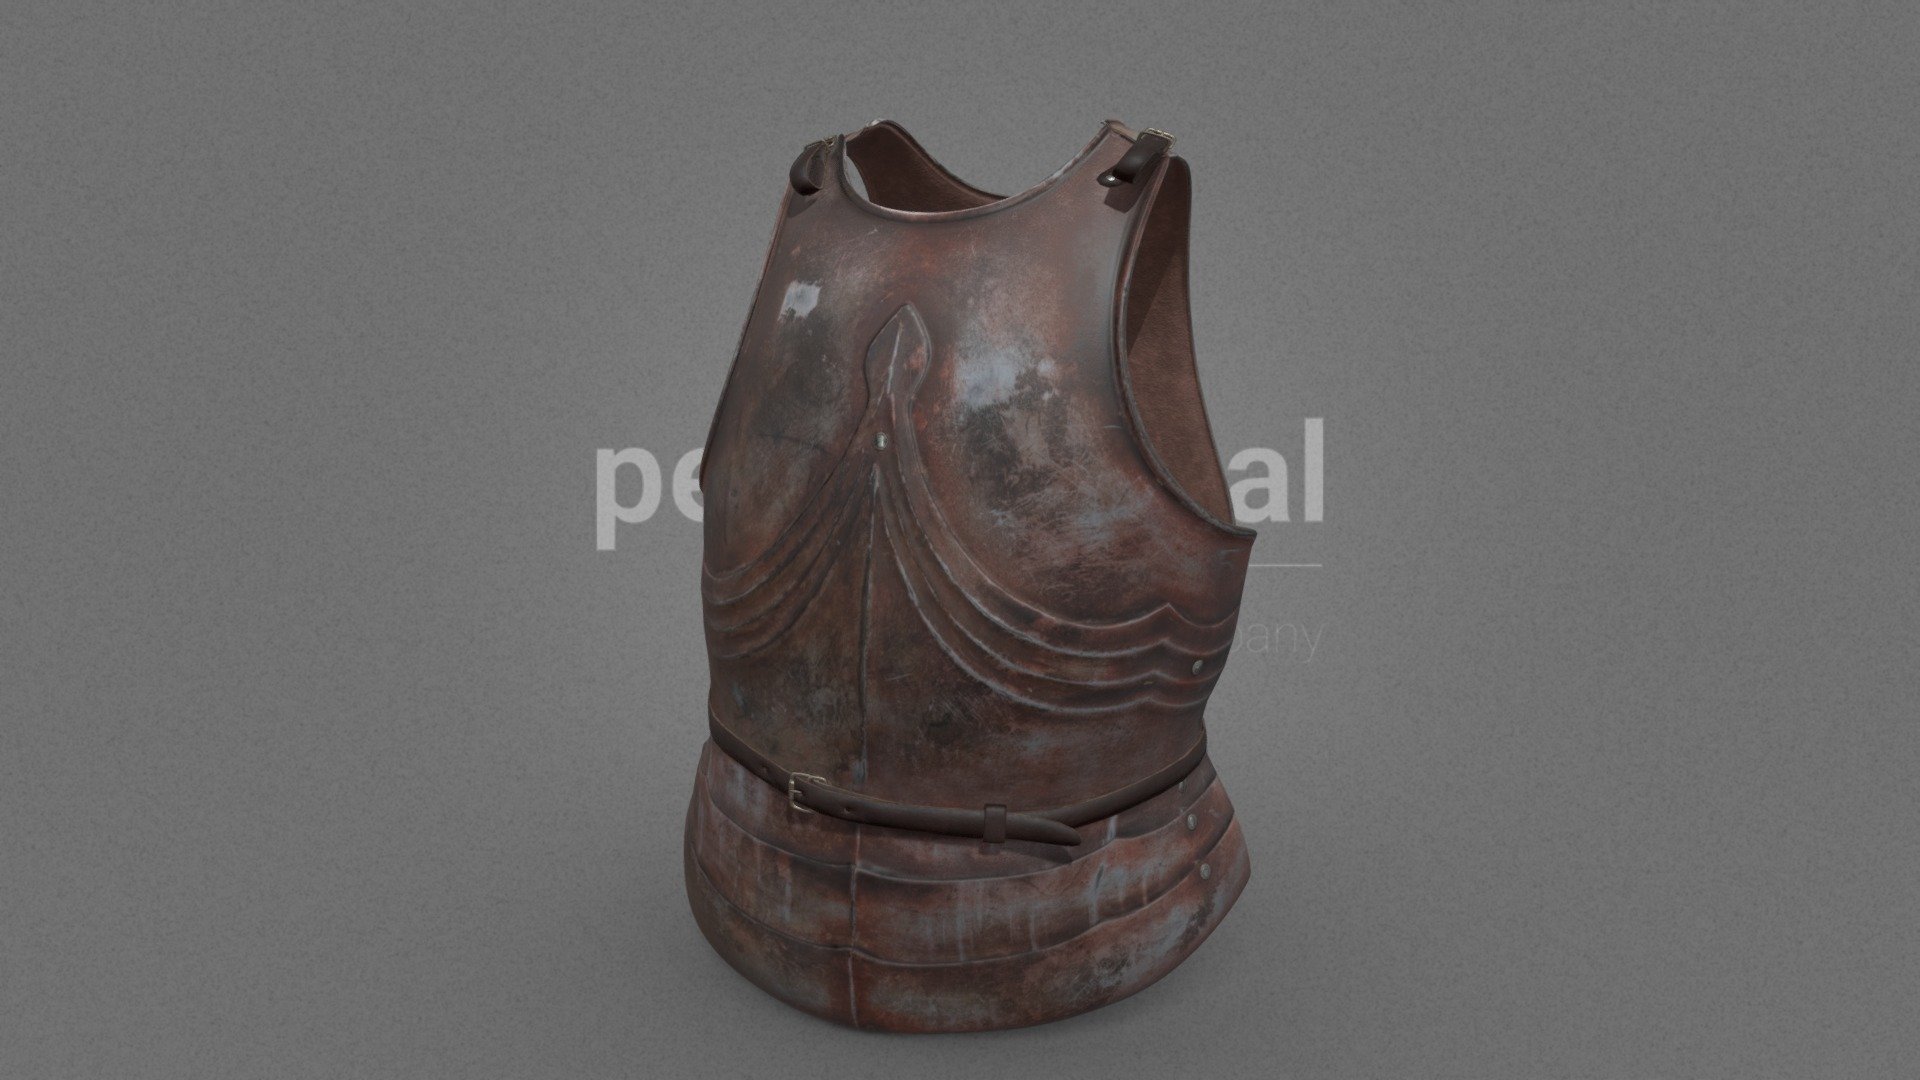 XIV, XV, XVI and XVII century medieval and renaissance rusted steel cuirass armor.

We are Peris Digital, and we make RAW meshes (Photogrammetry) and Digital Doubles.

This is a RAW mesh, taken by our photogrammetry team in our RIG with 144 Sony Alpha cameras.
Check our web, make your selection and contact us to get your costume scanned or talk with us to take a Demo RAW mesh to download it.

Contact: info@peris.costumes - Medieval Steel cuirass 02 - 3D model by Peris Digital (@perisdigital) 3d model